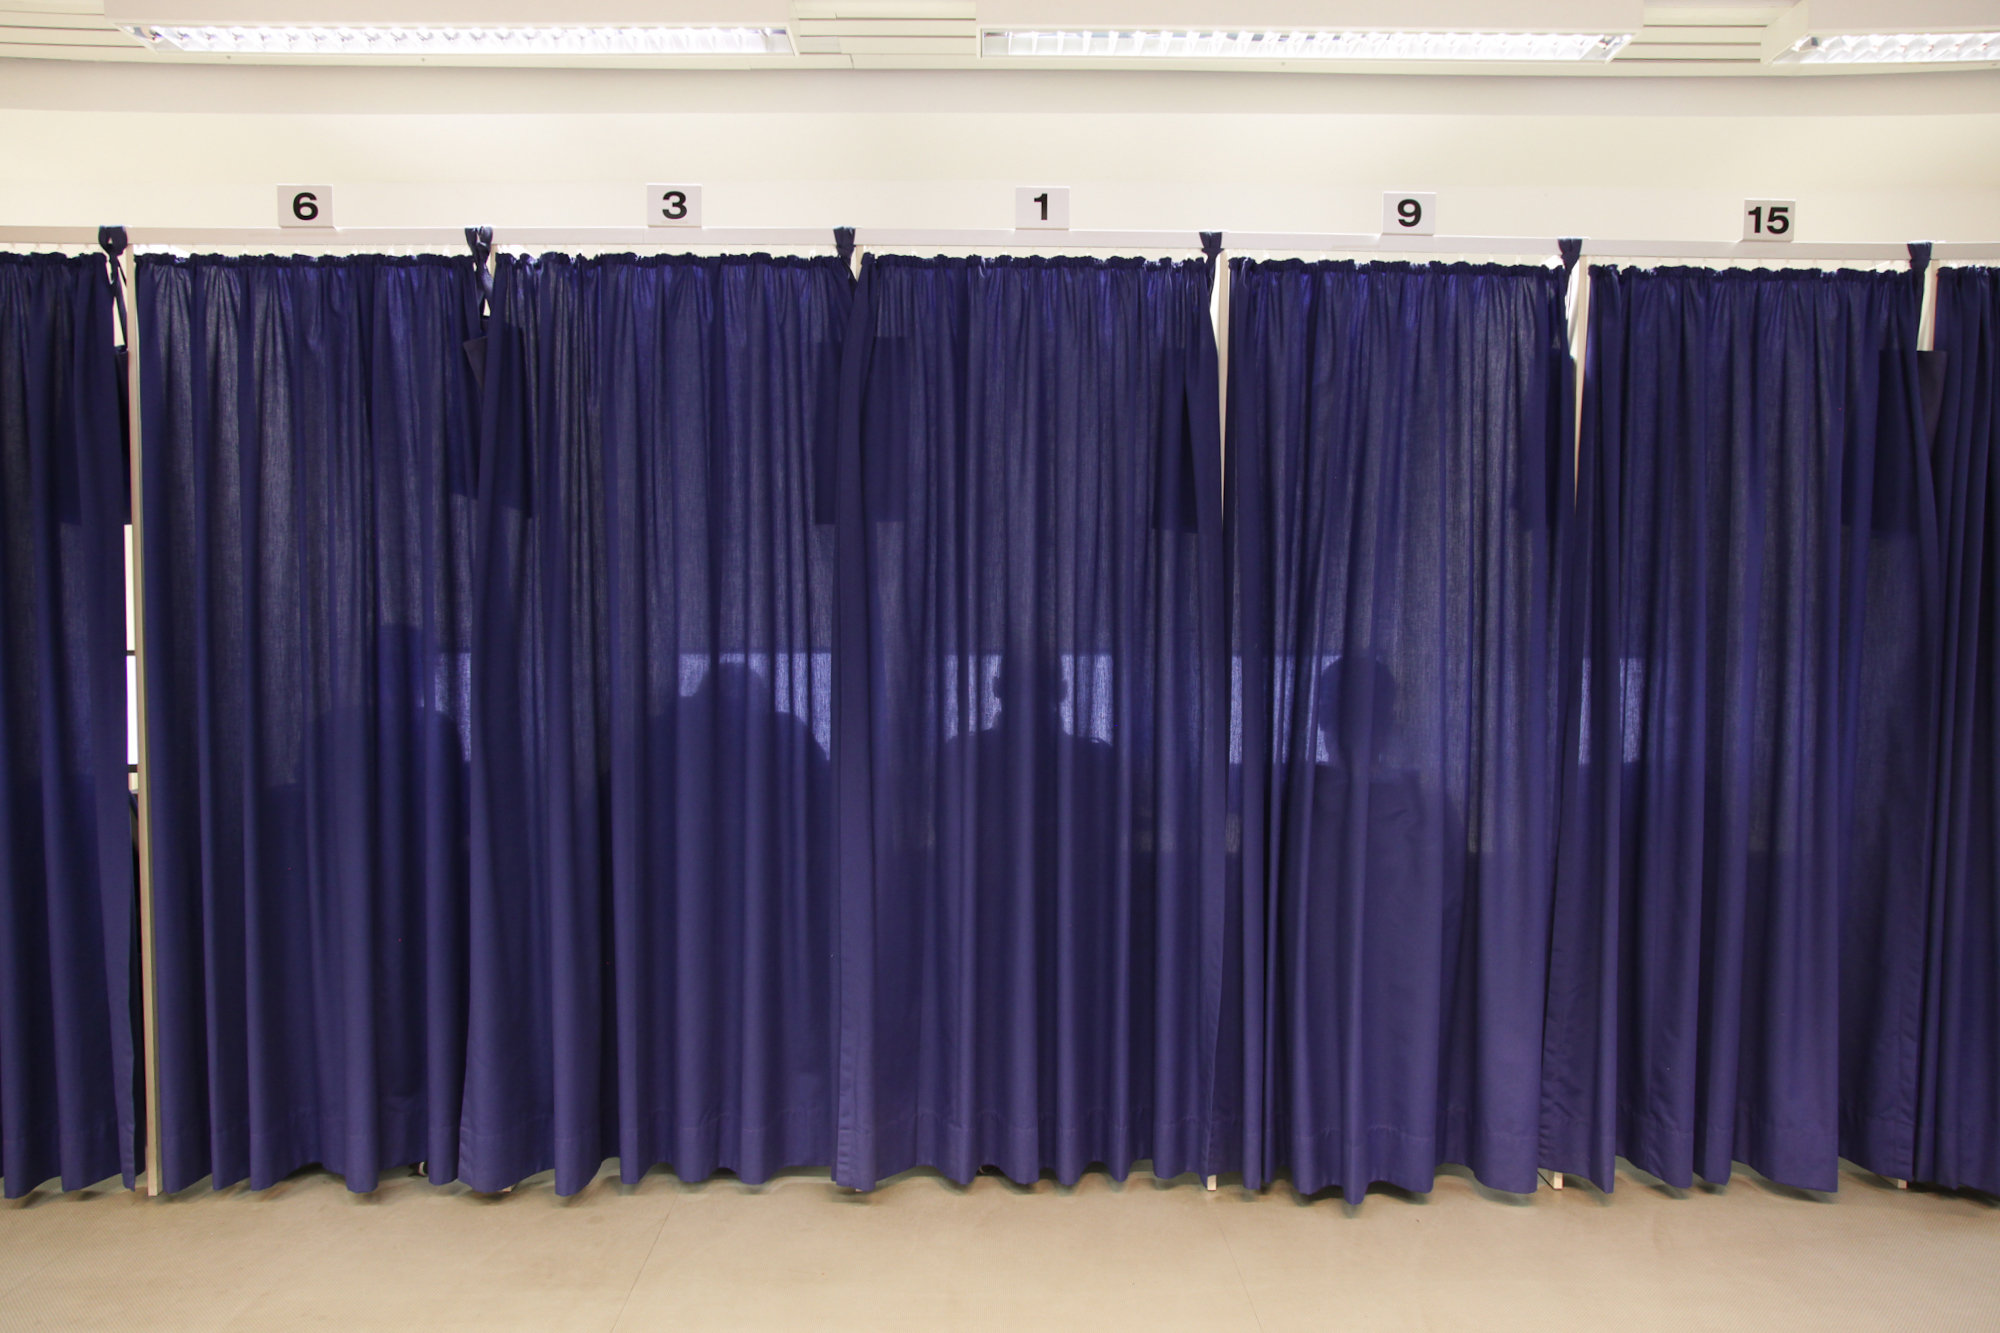 6 Cubicles with curtains closed